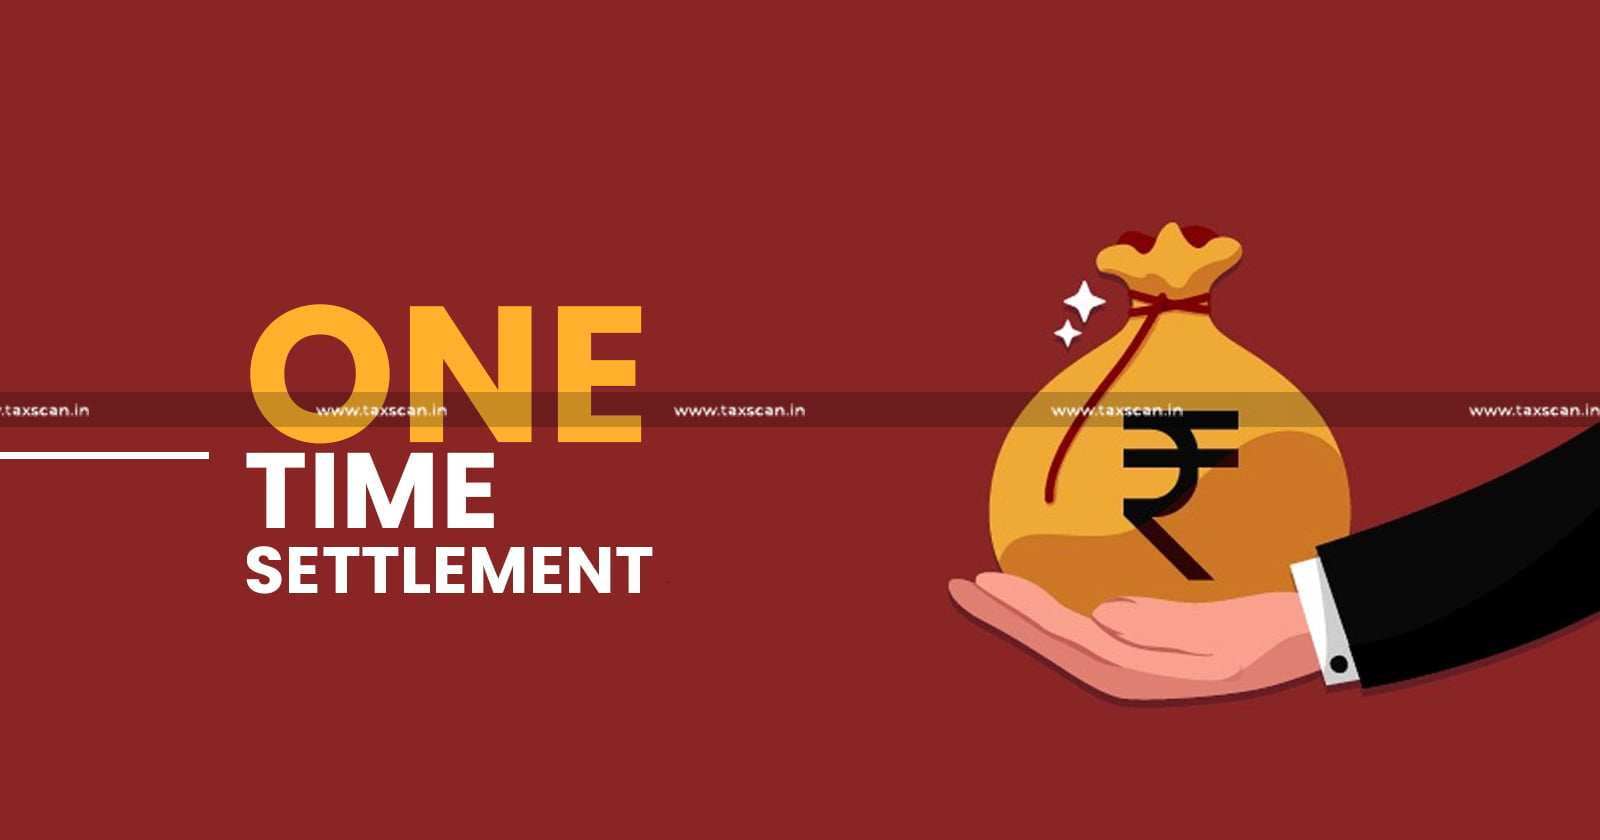 GST - Bihar Government - Pre GST Tax Dues - One Time Settlement - TAXSCAN